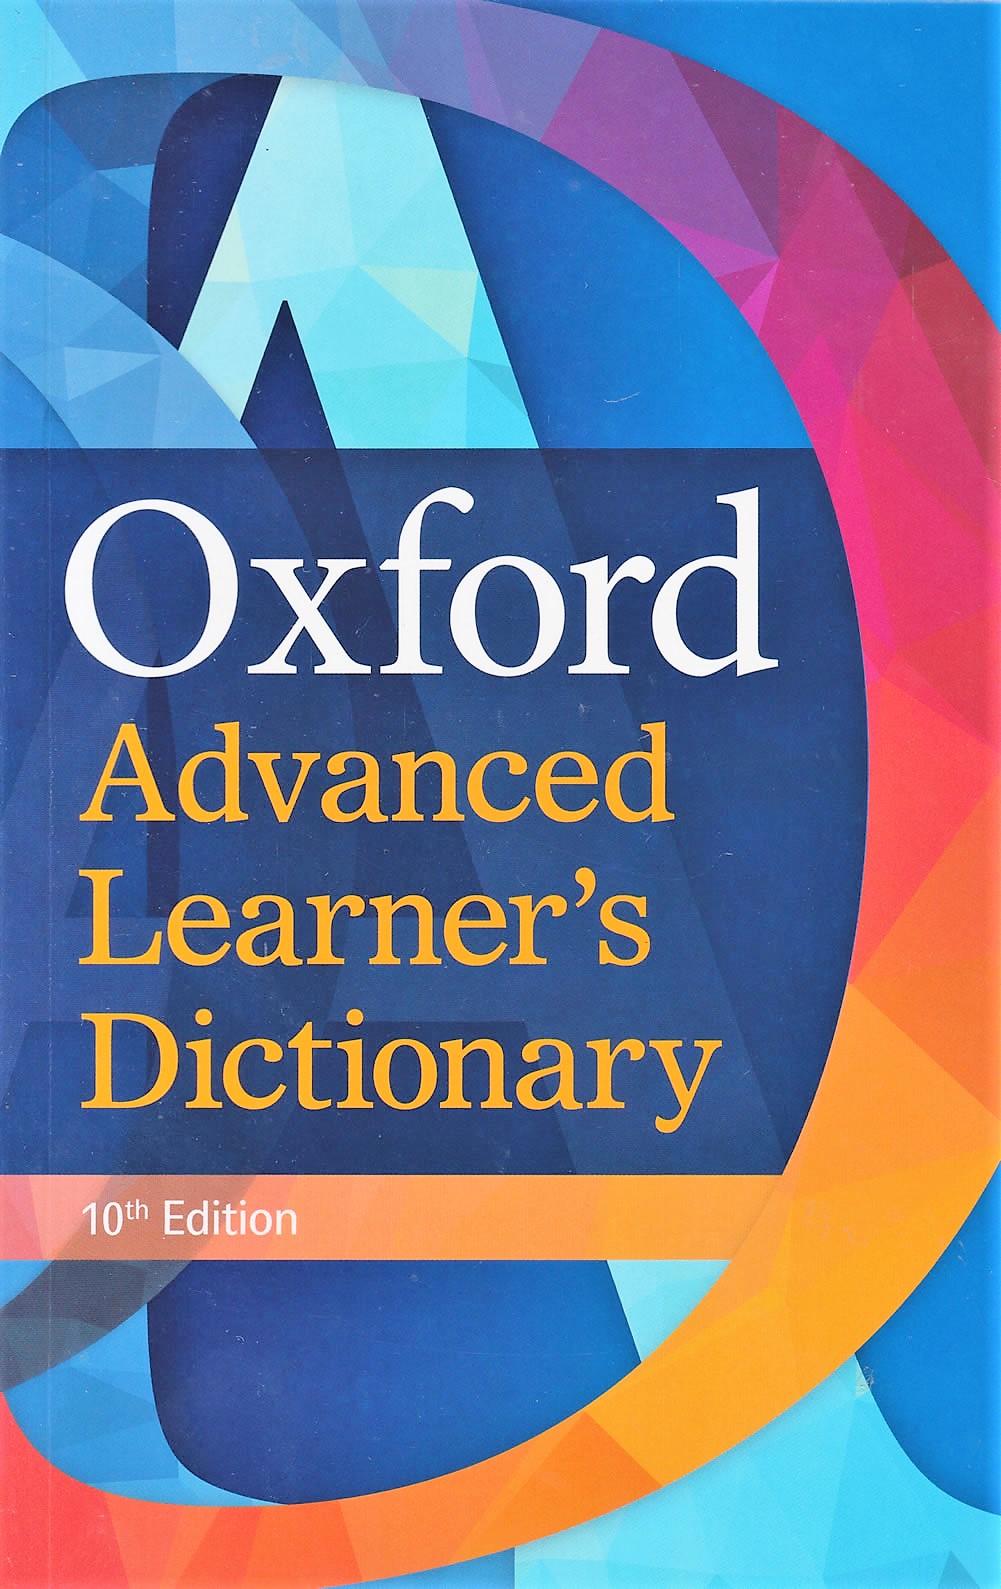 Advanced learner s dictionary. Oxford Advanced Learners Dictionary oald 10th Edition. Oxford Advanced Learner's Dictionary. Oxford Advanced Learner's. Oxford Advanced Learner's Dictionary книга.